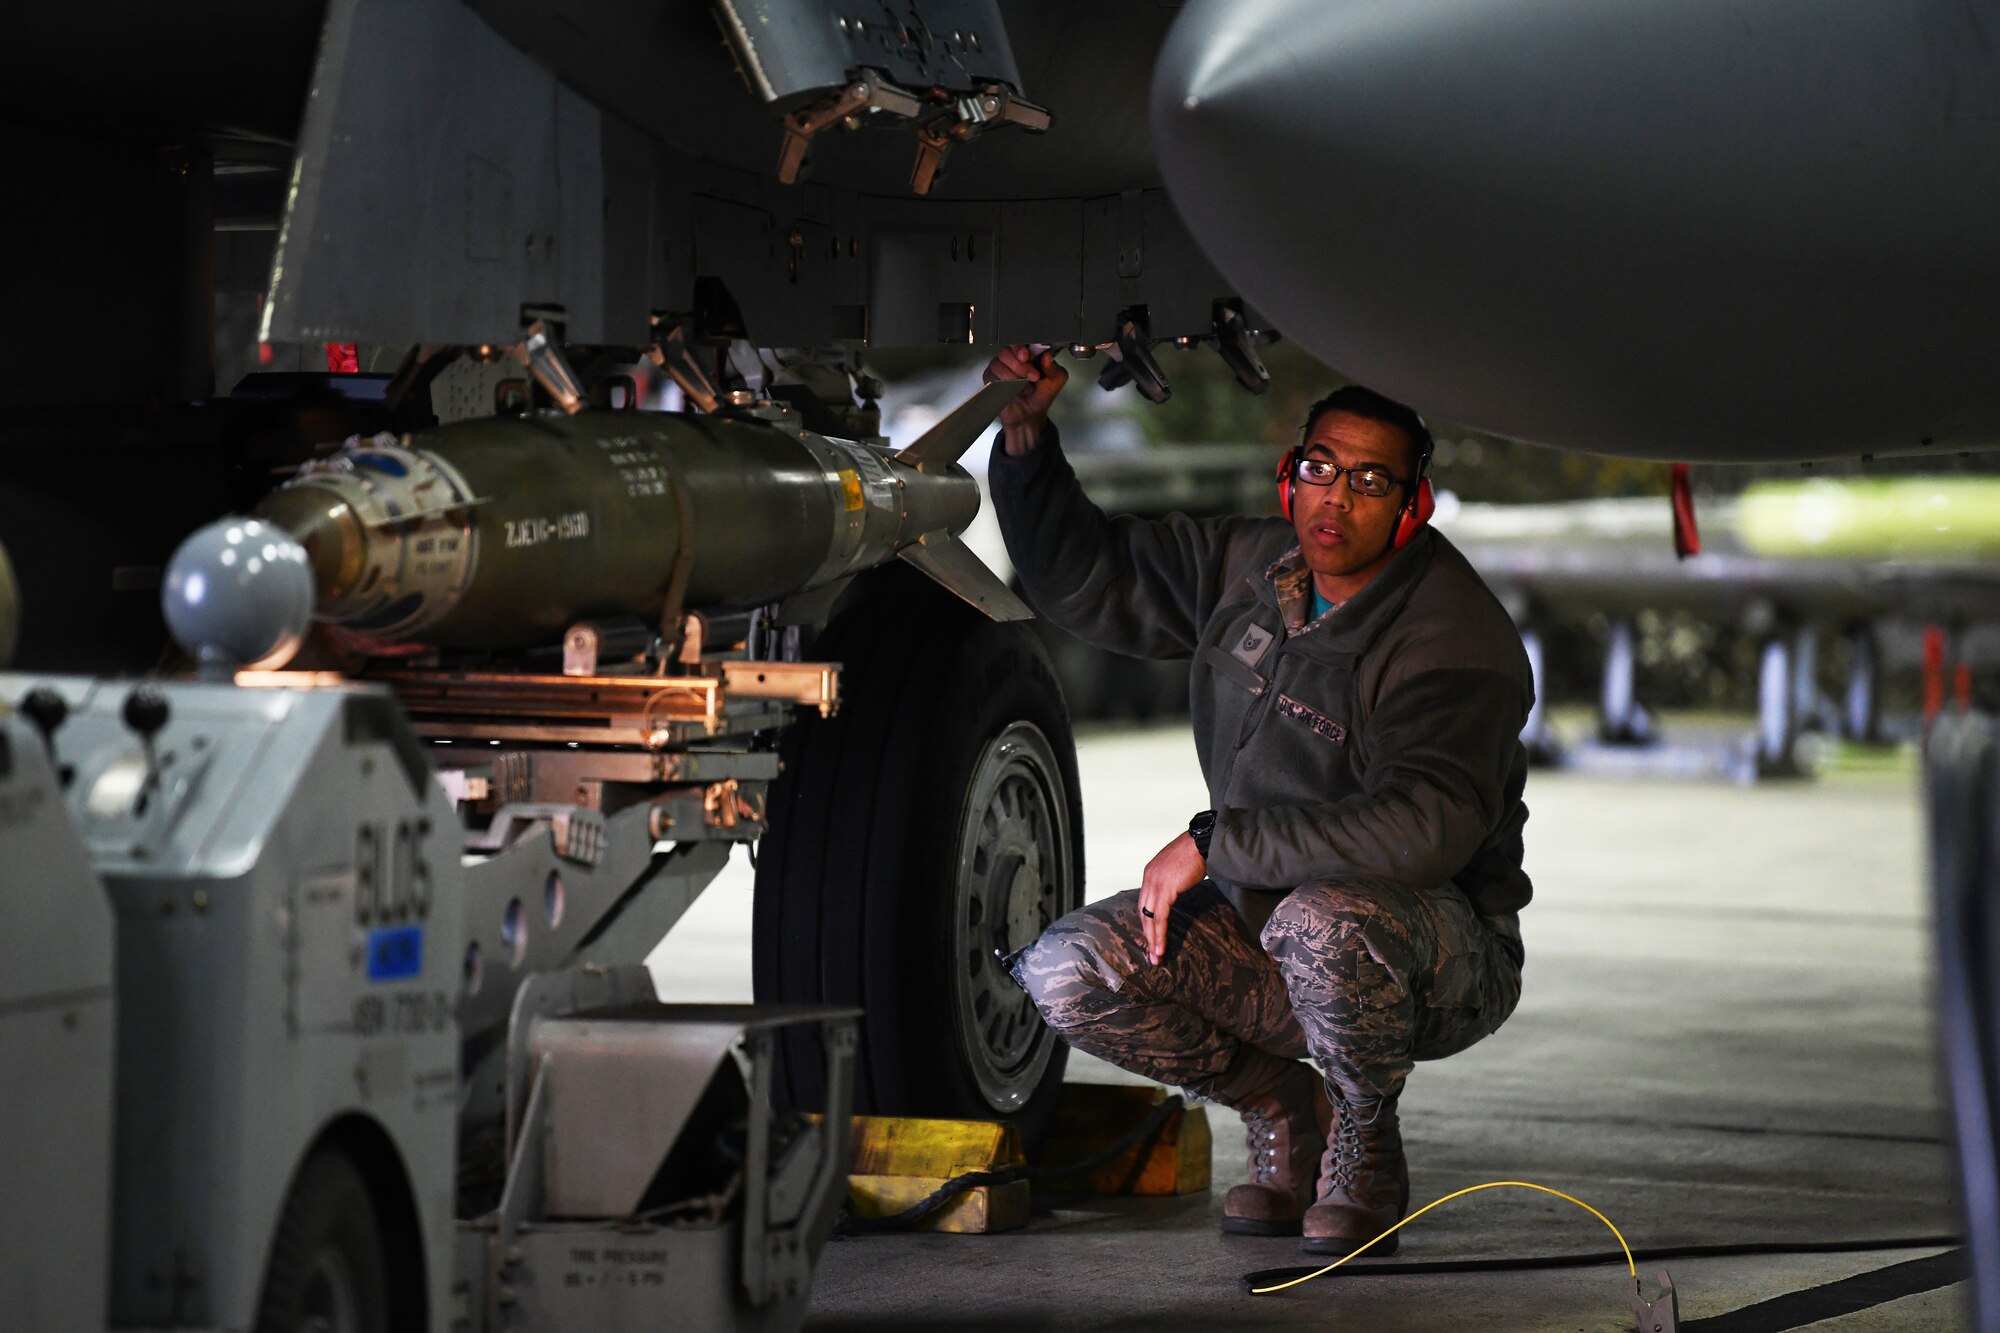 A loading standardization crew member observes the loading of an inert MK-82 ordinance on an F-15E Strike Eagle during a loading competition at Royal Air Force Lakenheath, England, Jan. 18, 2019. The load crew team were judged on their ability to load both an inert MK-82 and a GBU-38 on the aircrafts. (U.S. Air Force photo by Airman 1st Class Shanice Williams-Jones)